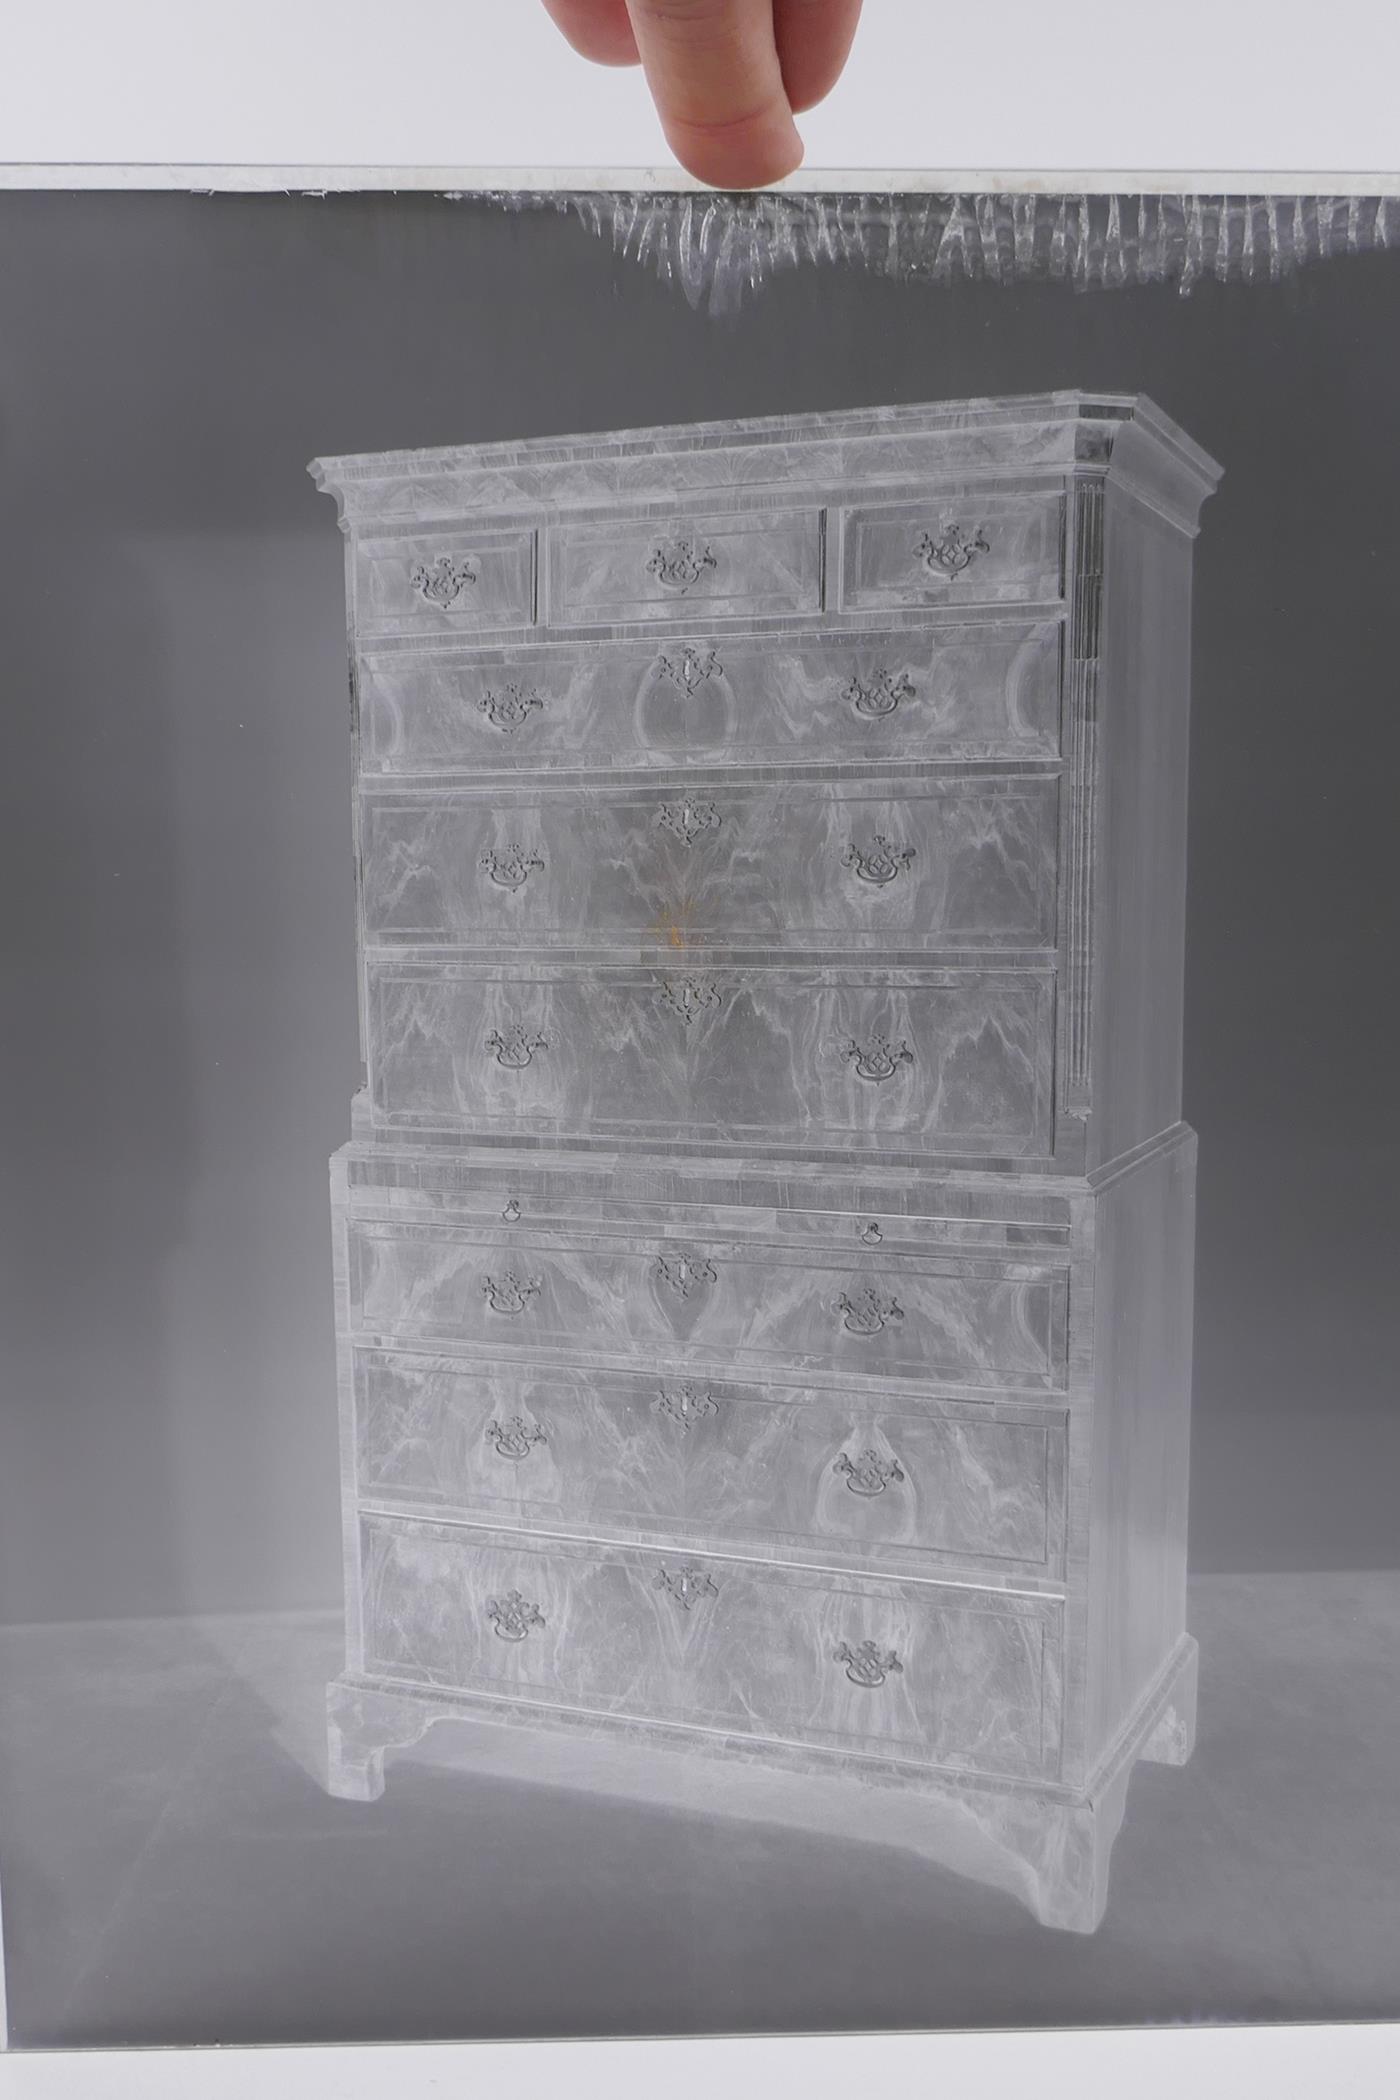 A collection of eight early to mid century glass plate negative photographs of antiques, possibly by - Image 7 of 9